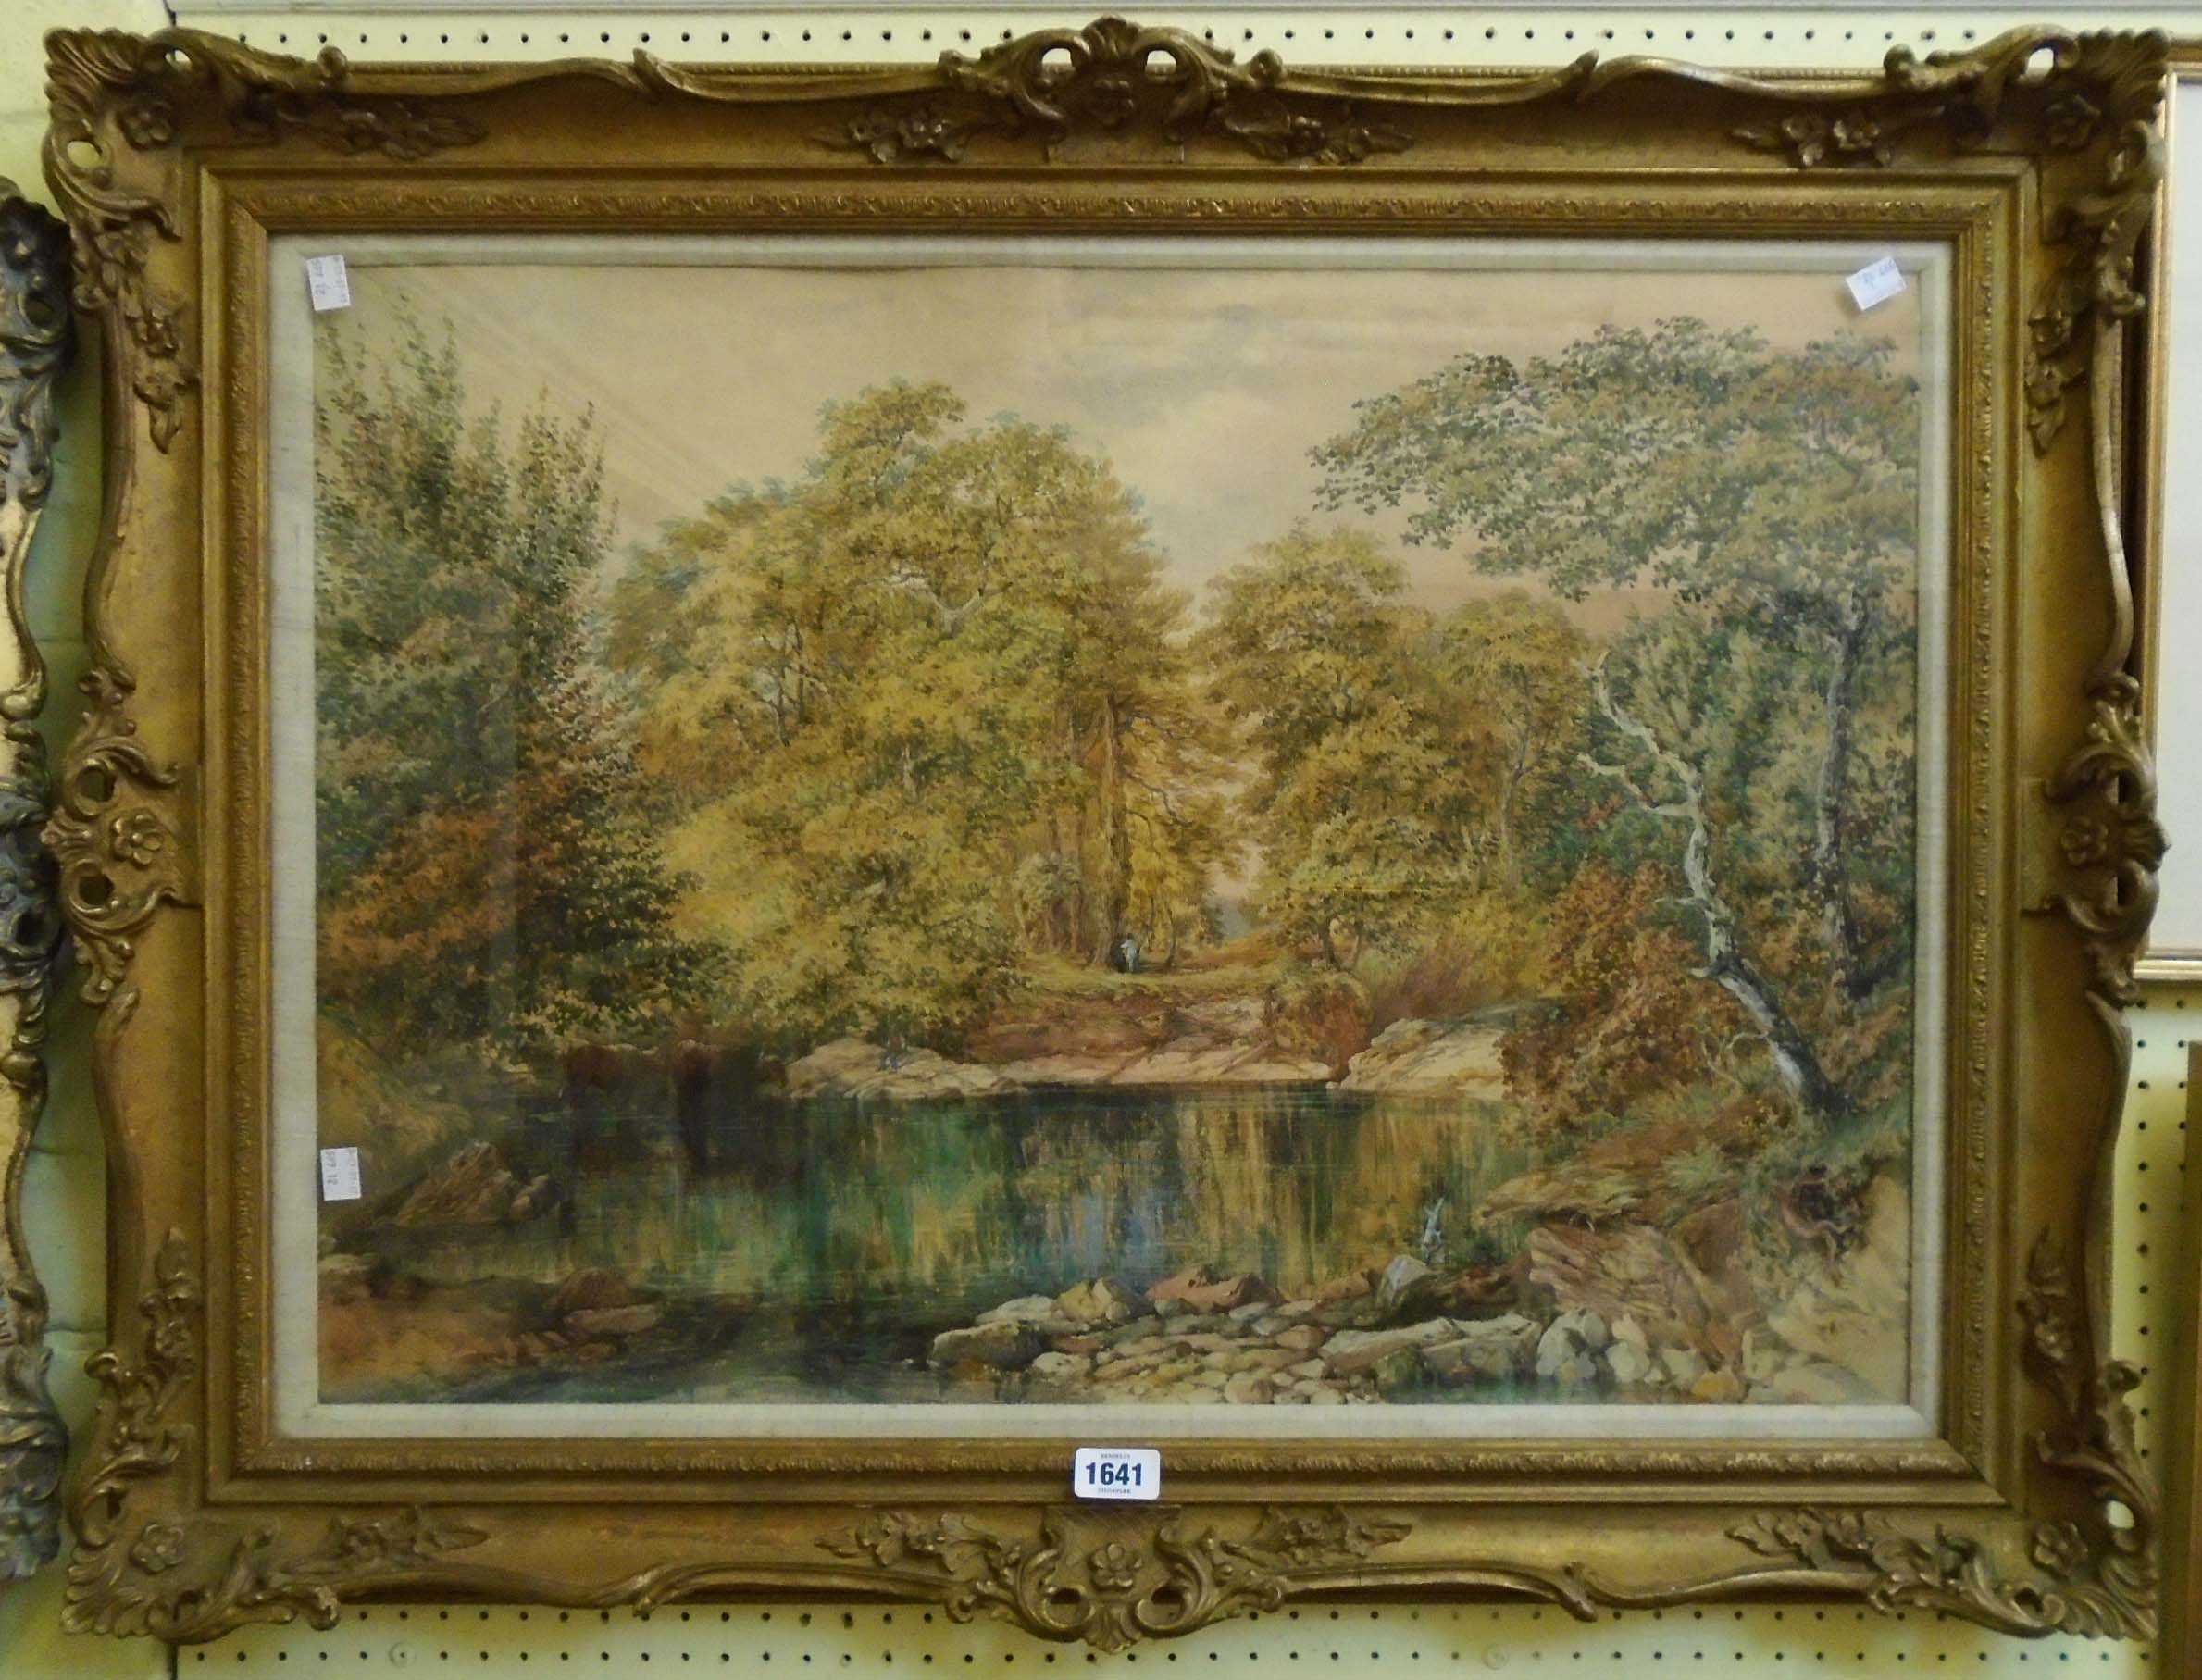 Philip Mitchell: an ornate gilt framed watercolour, depicting cattle watering in a river pool with